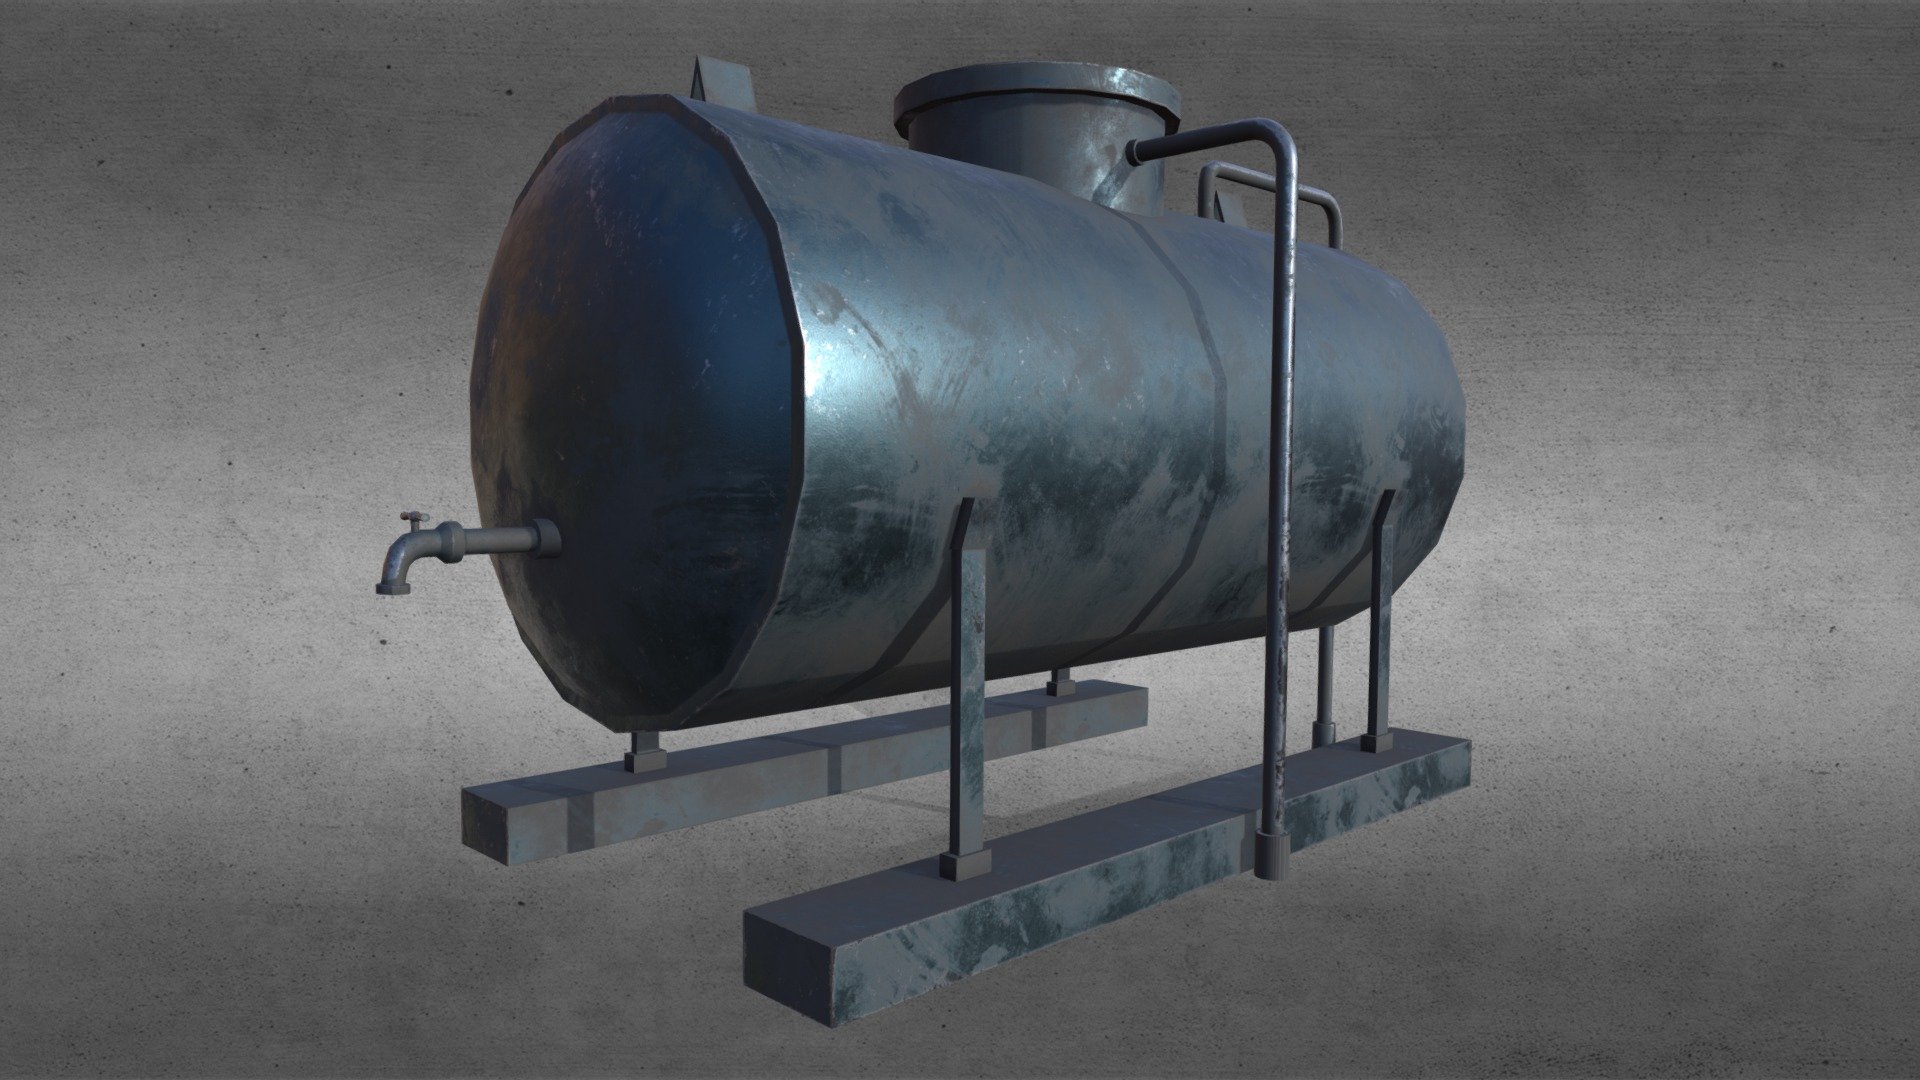 A realistic water tank with high-quality 2k resolution textures with weathering and rust finishes.




2K PBR Texture included 
-Non-Overlap UV
-Low-Poly
-Available in industry-standard file formats such as: fbx, obj, 3DsMax.

Model created with, and native to, 3DsMax 2020
Textures were created in, and exported from, Substance Painter.

Please Fallow Us And dont Forget Comment you Feedback !

Thank YOU :) - Water Tank - Buy Royalty Free 3D model by leonart4d 3d model